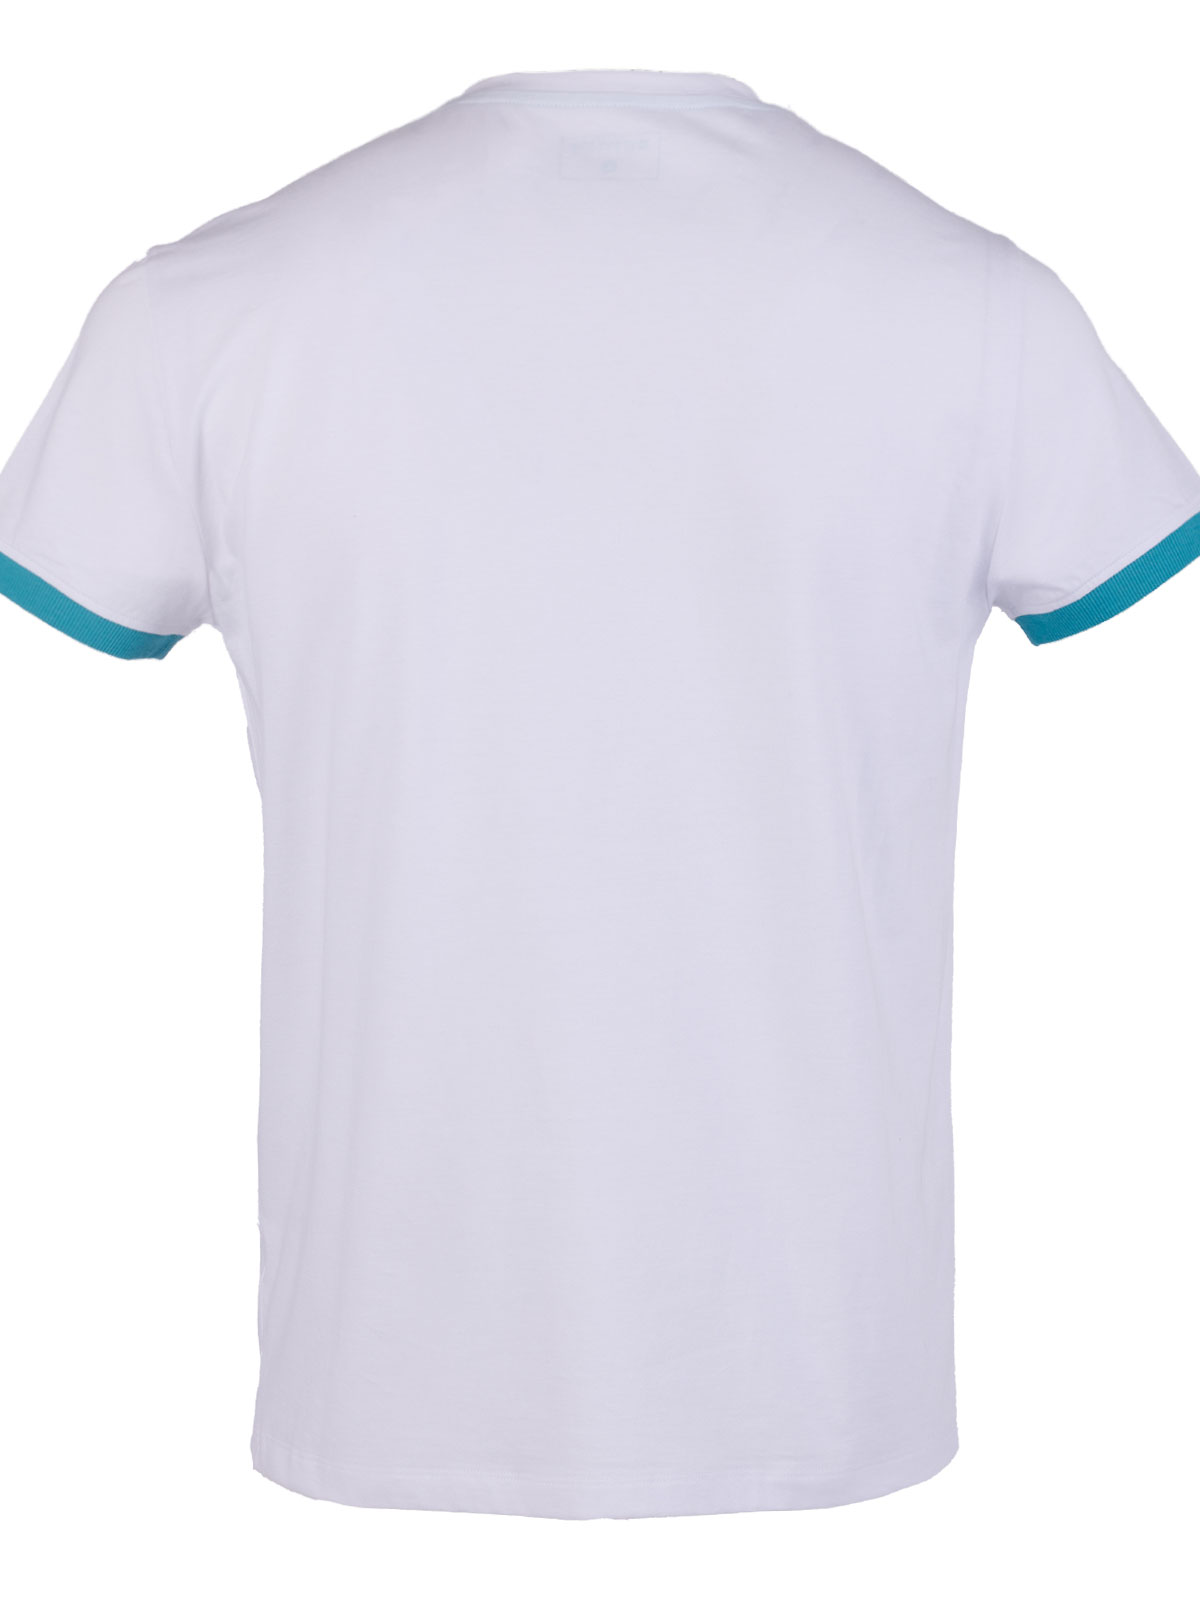 White tshirt with printed colorful line - 96473 € 27.56 img2